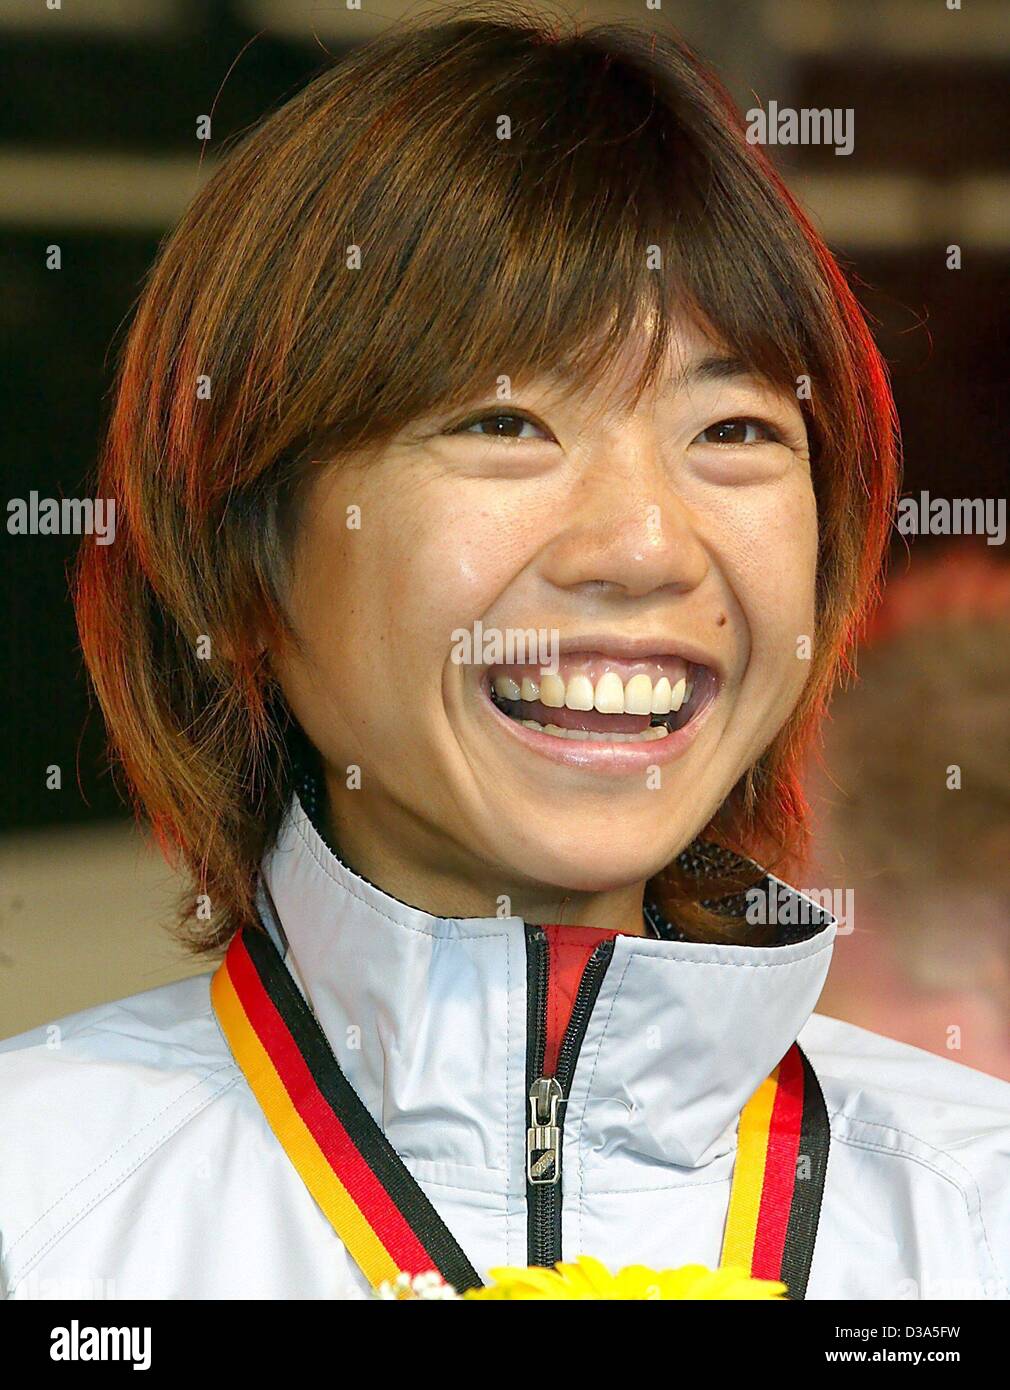 (dpa) - Japan's Naoko Takahashi on the podium after winning the marathon in Berlin, 29 September 2002. The 30-year-old wins with a time of 2hrs 21min 23sec. Stock Photo